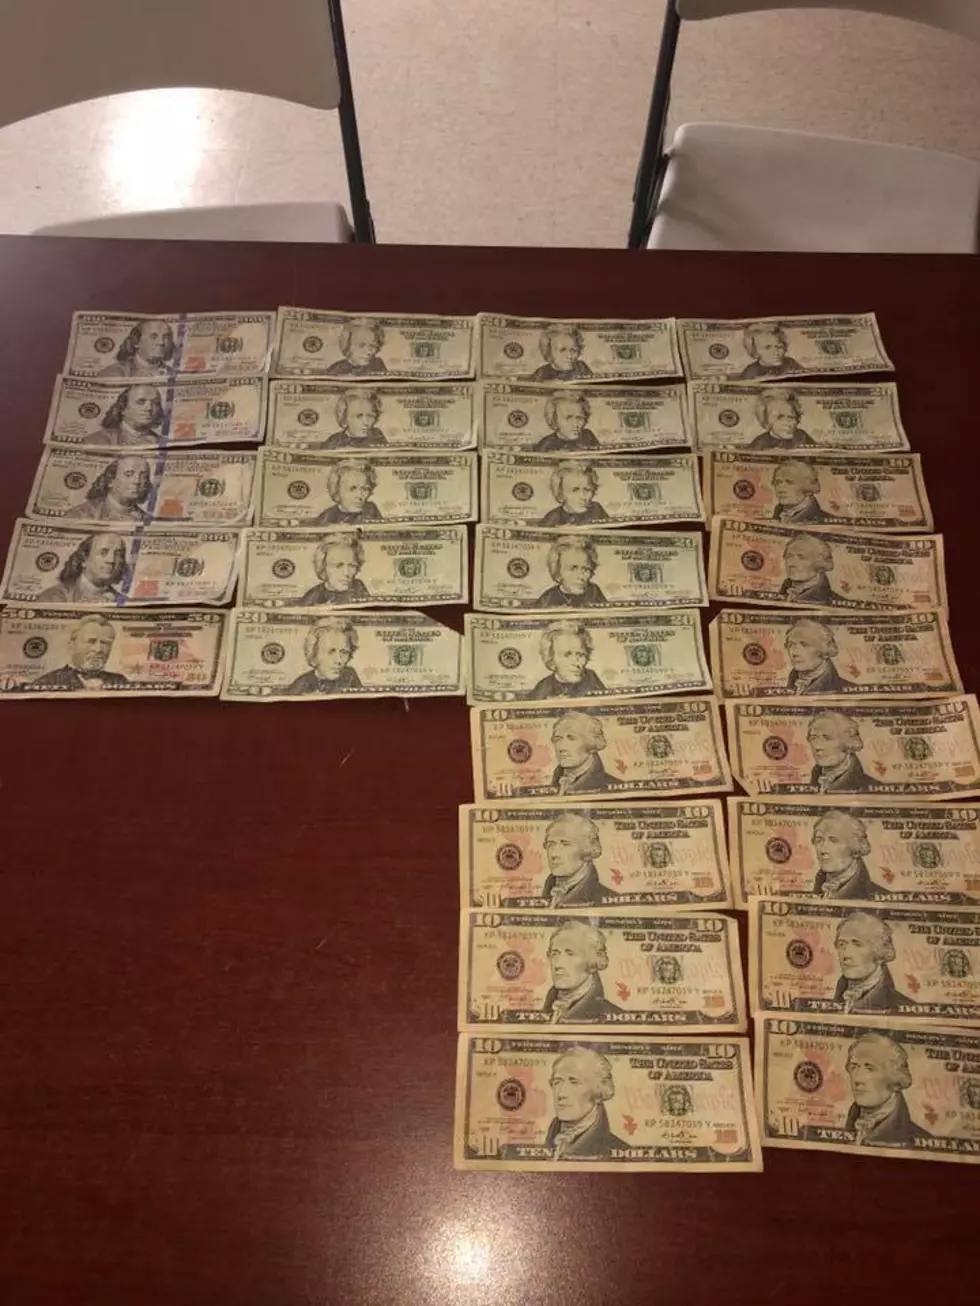 Lake Arthur Police Confiscate Counterfeit Bills with ‘United Sates’ on Them